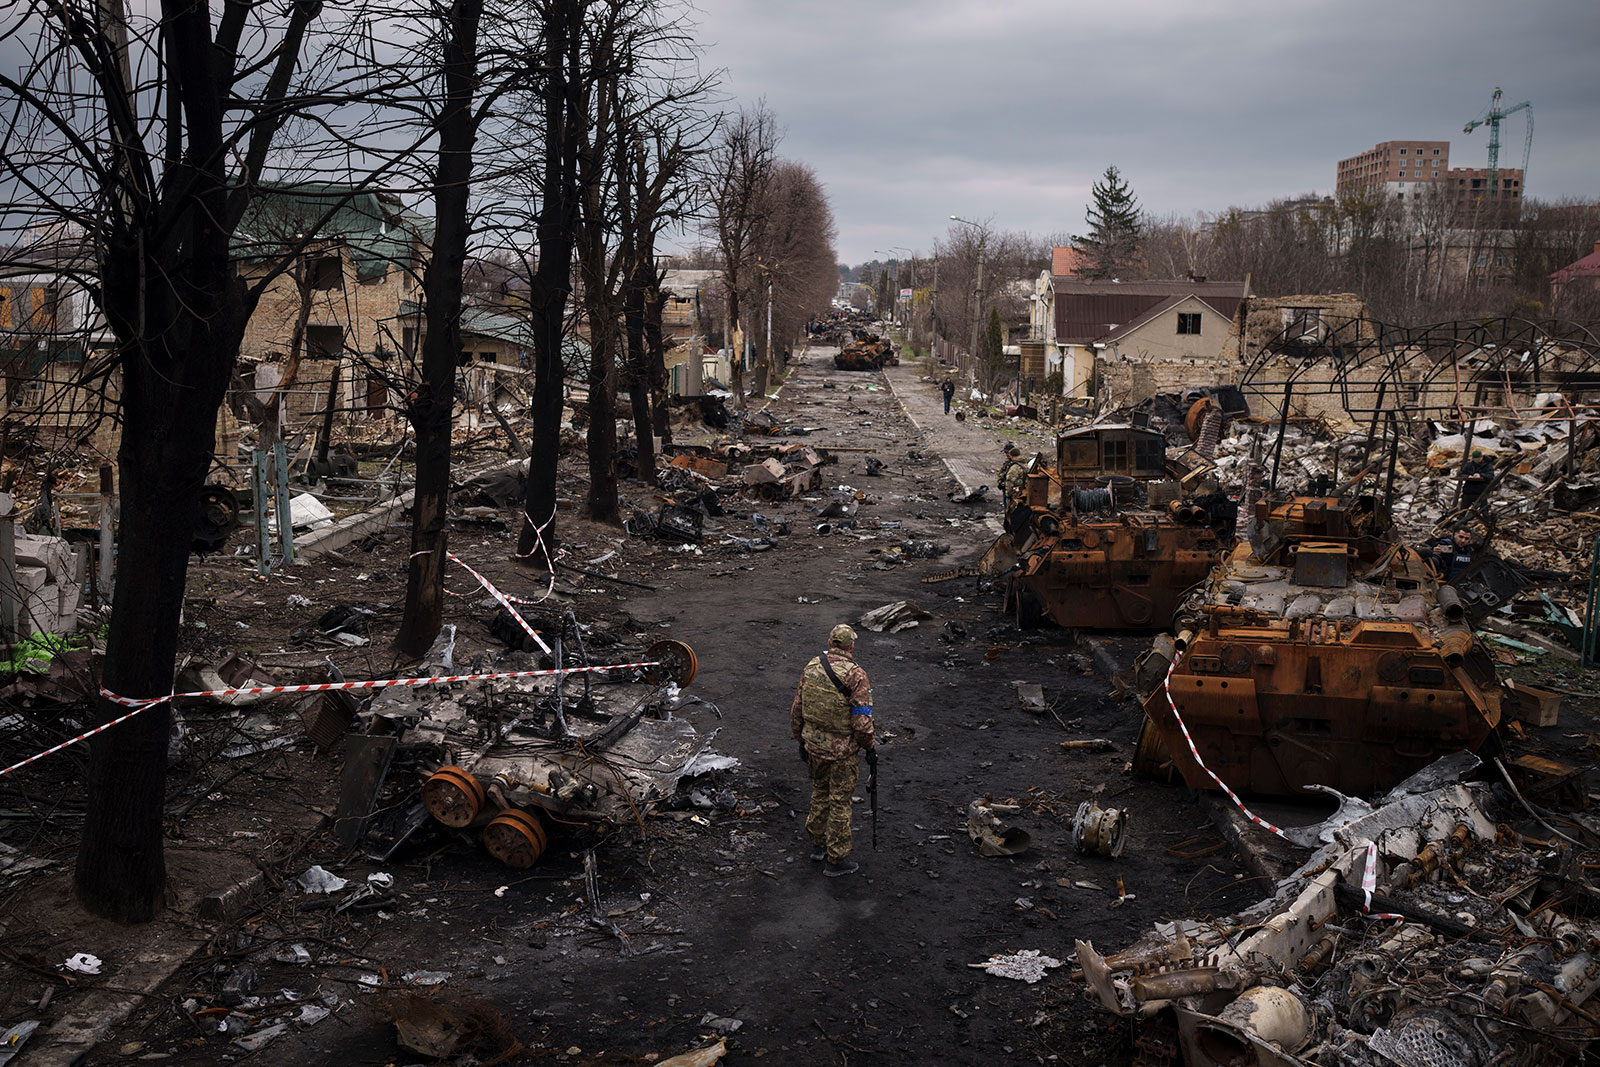 Kremlin spokesman admits "significant" losses of Russian forces in Ukraine